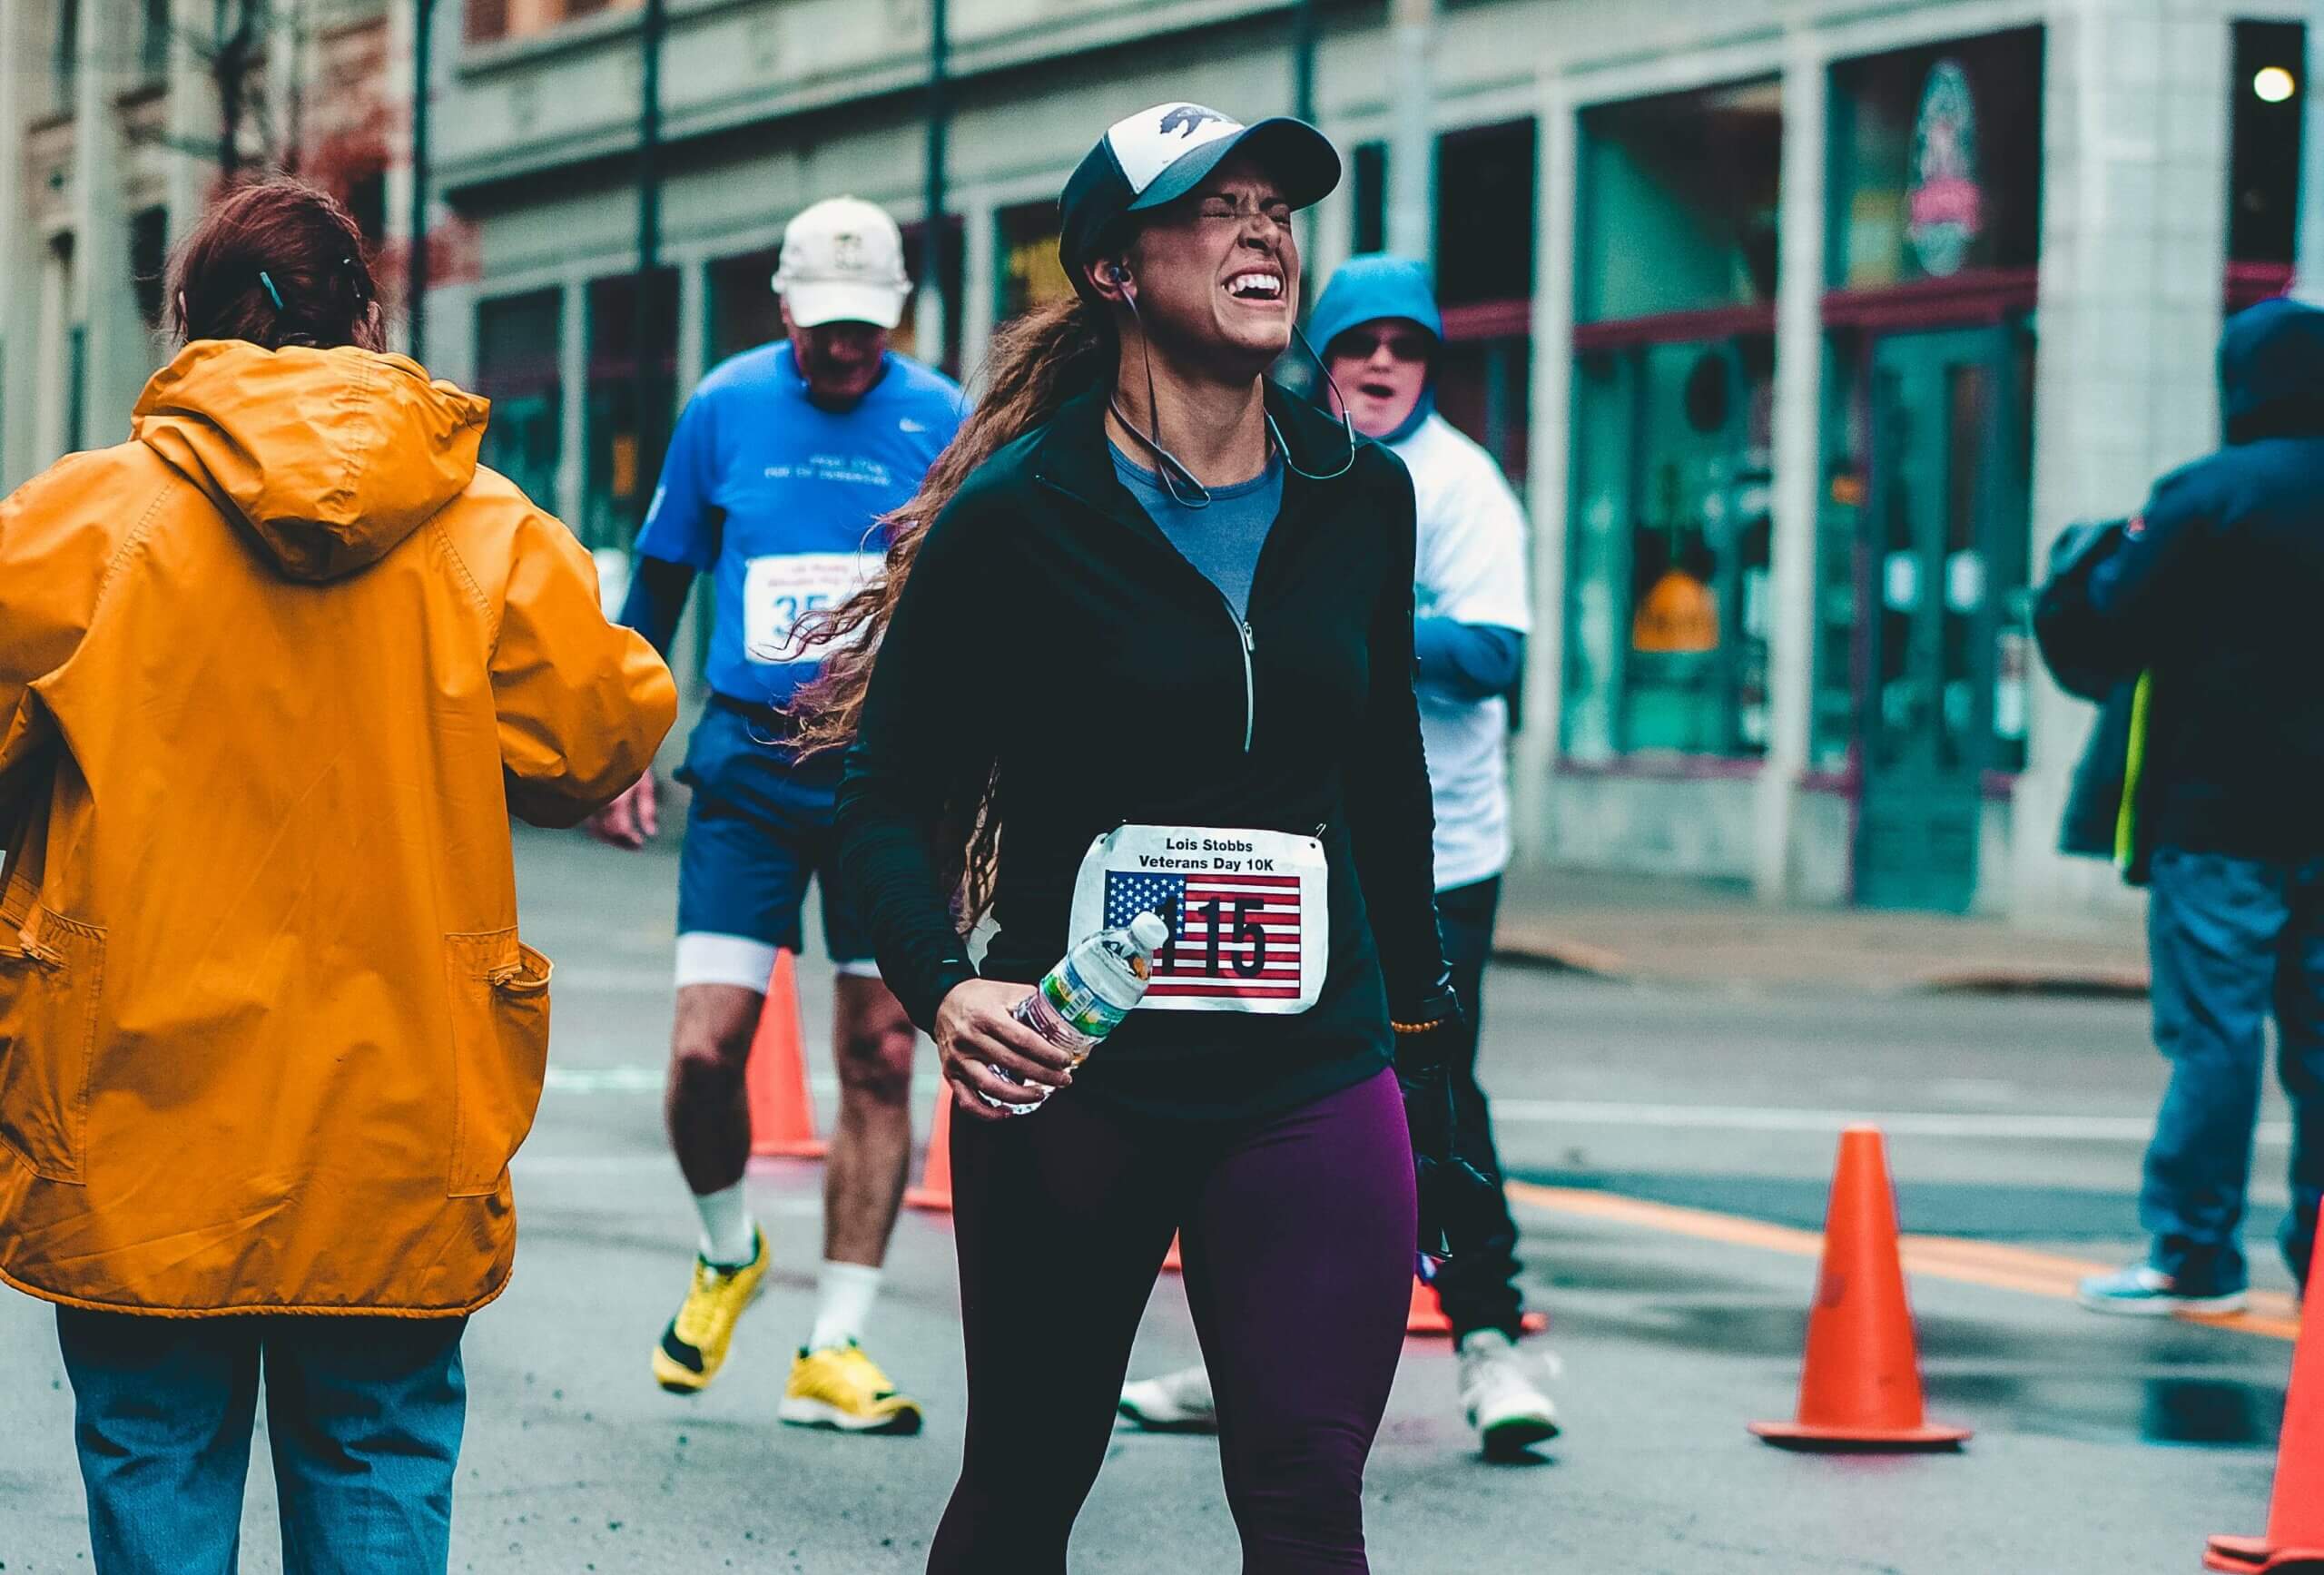 Runner at finish line after setting realistic goals